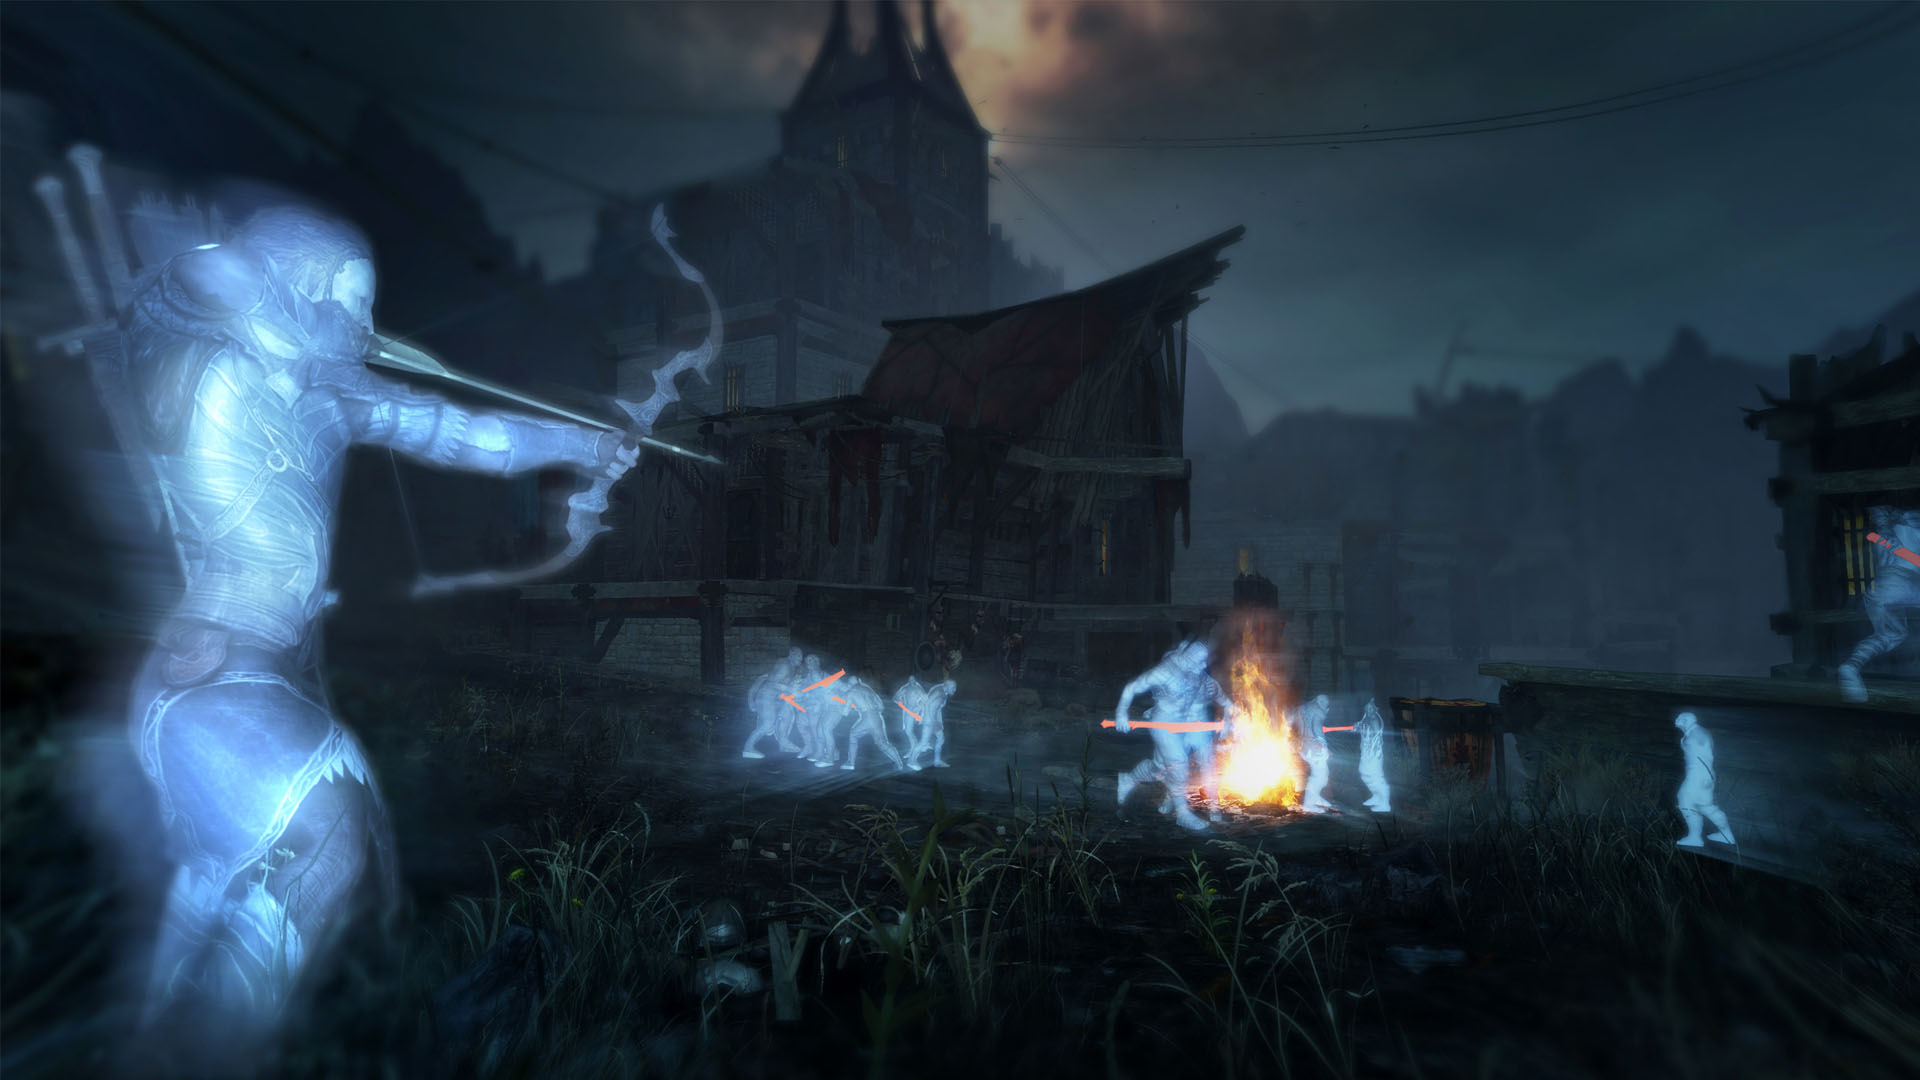 Middle-Earth: Shadow of Mordor - The Bright Lord DLC Now Available